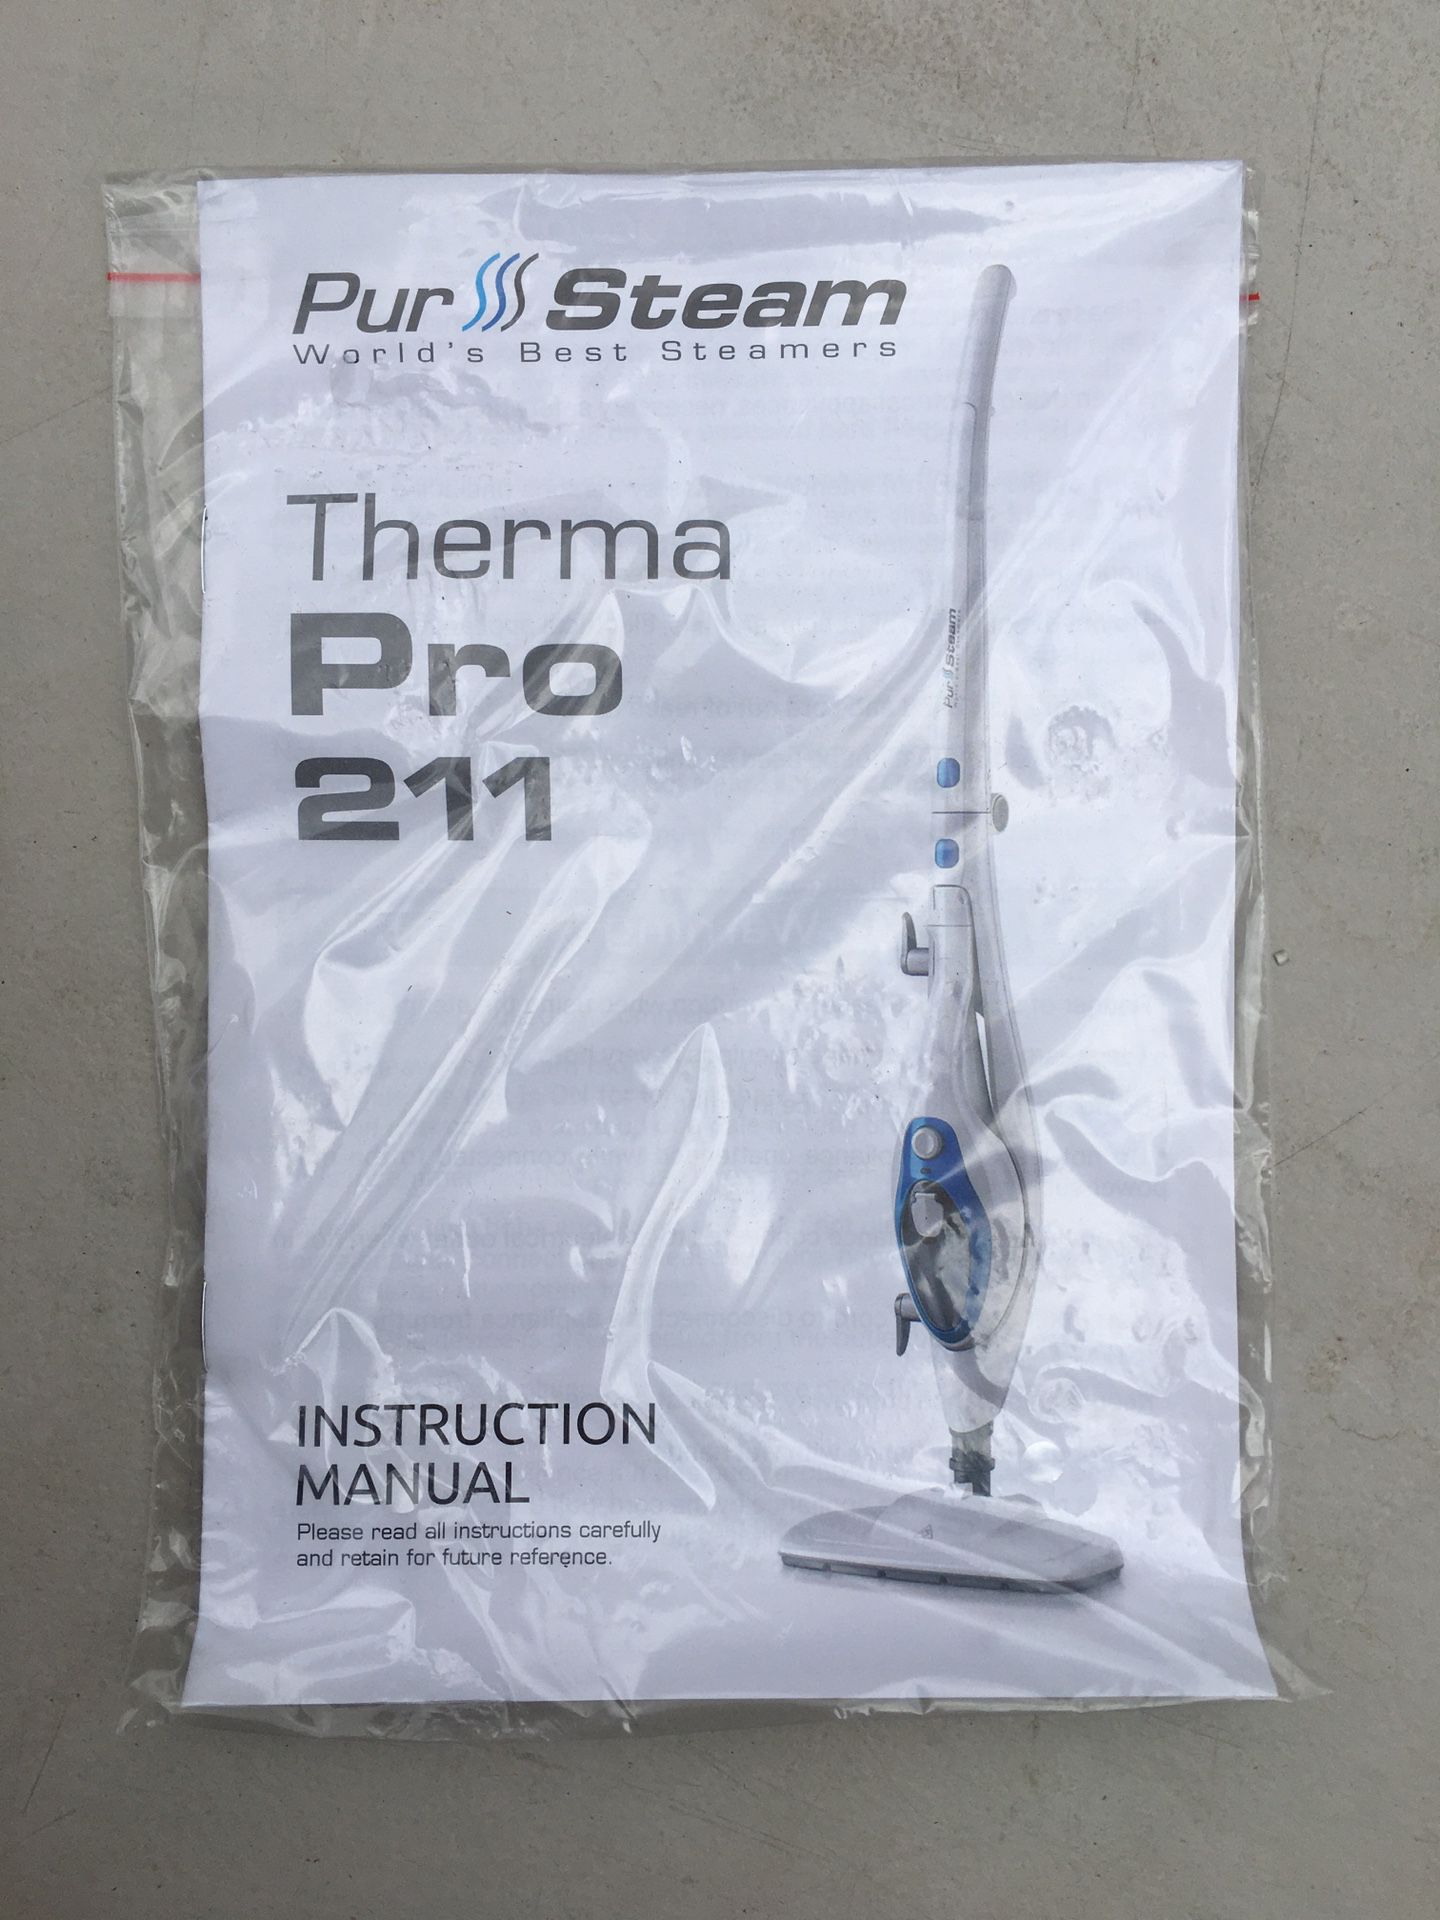 PurSteam Therma Pro 211 Mop Cleaner Instructions Manual